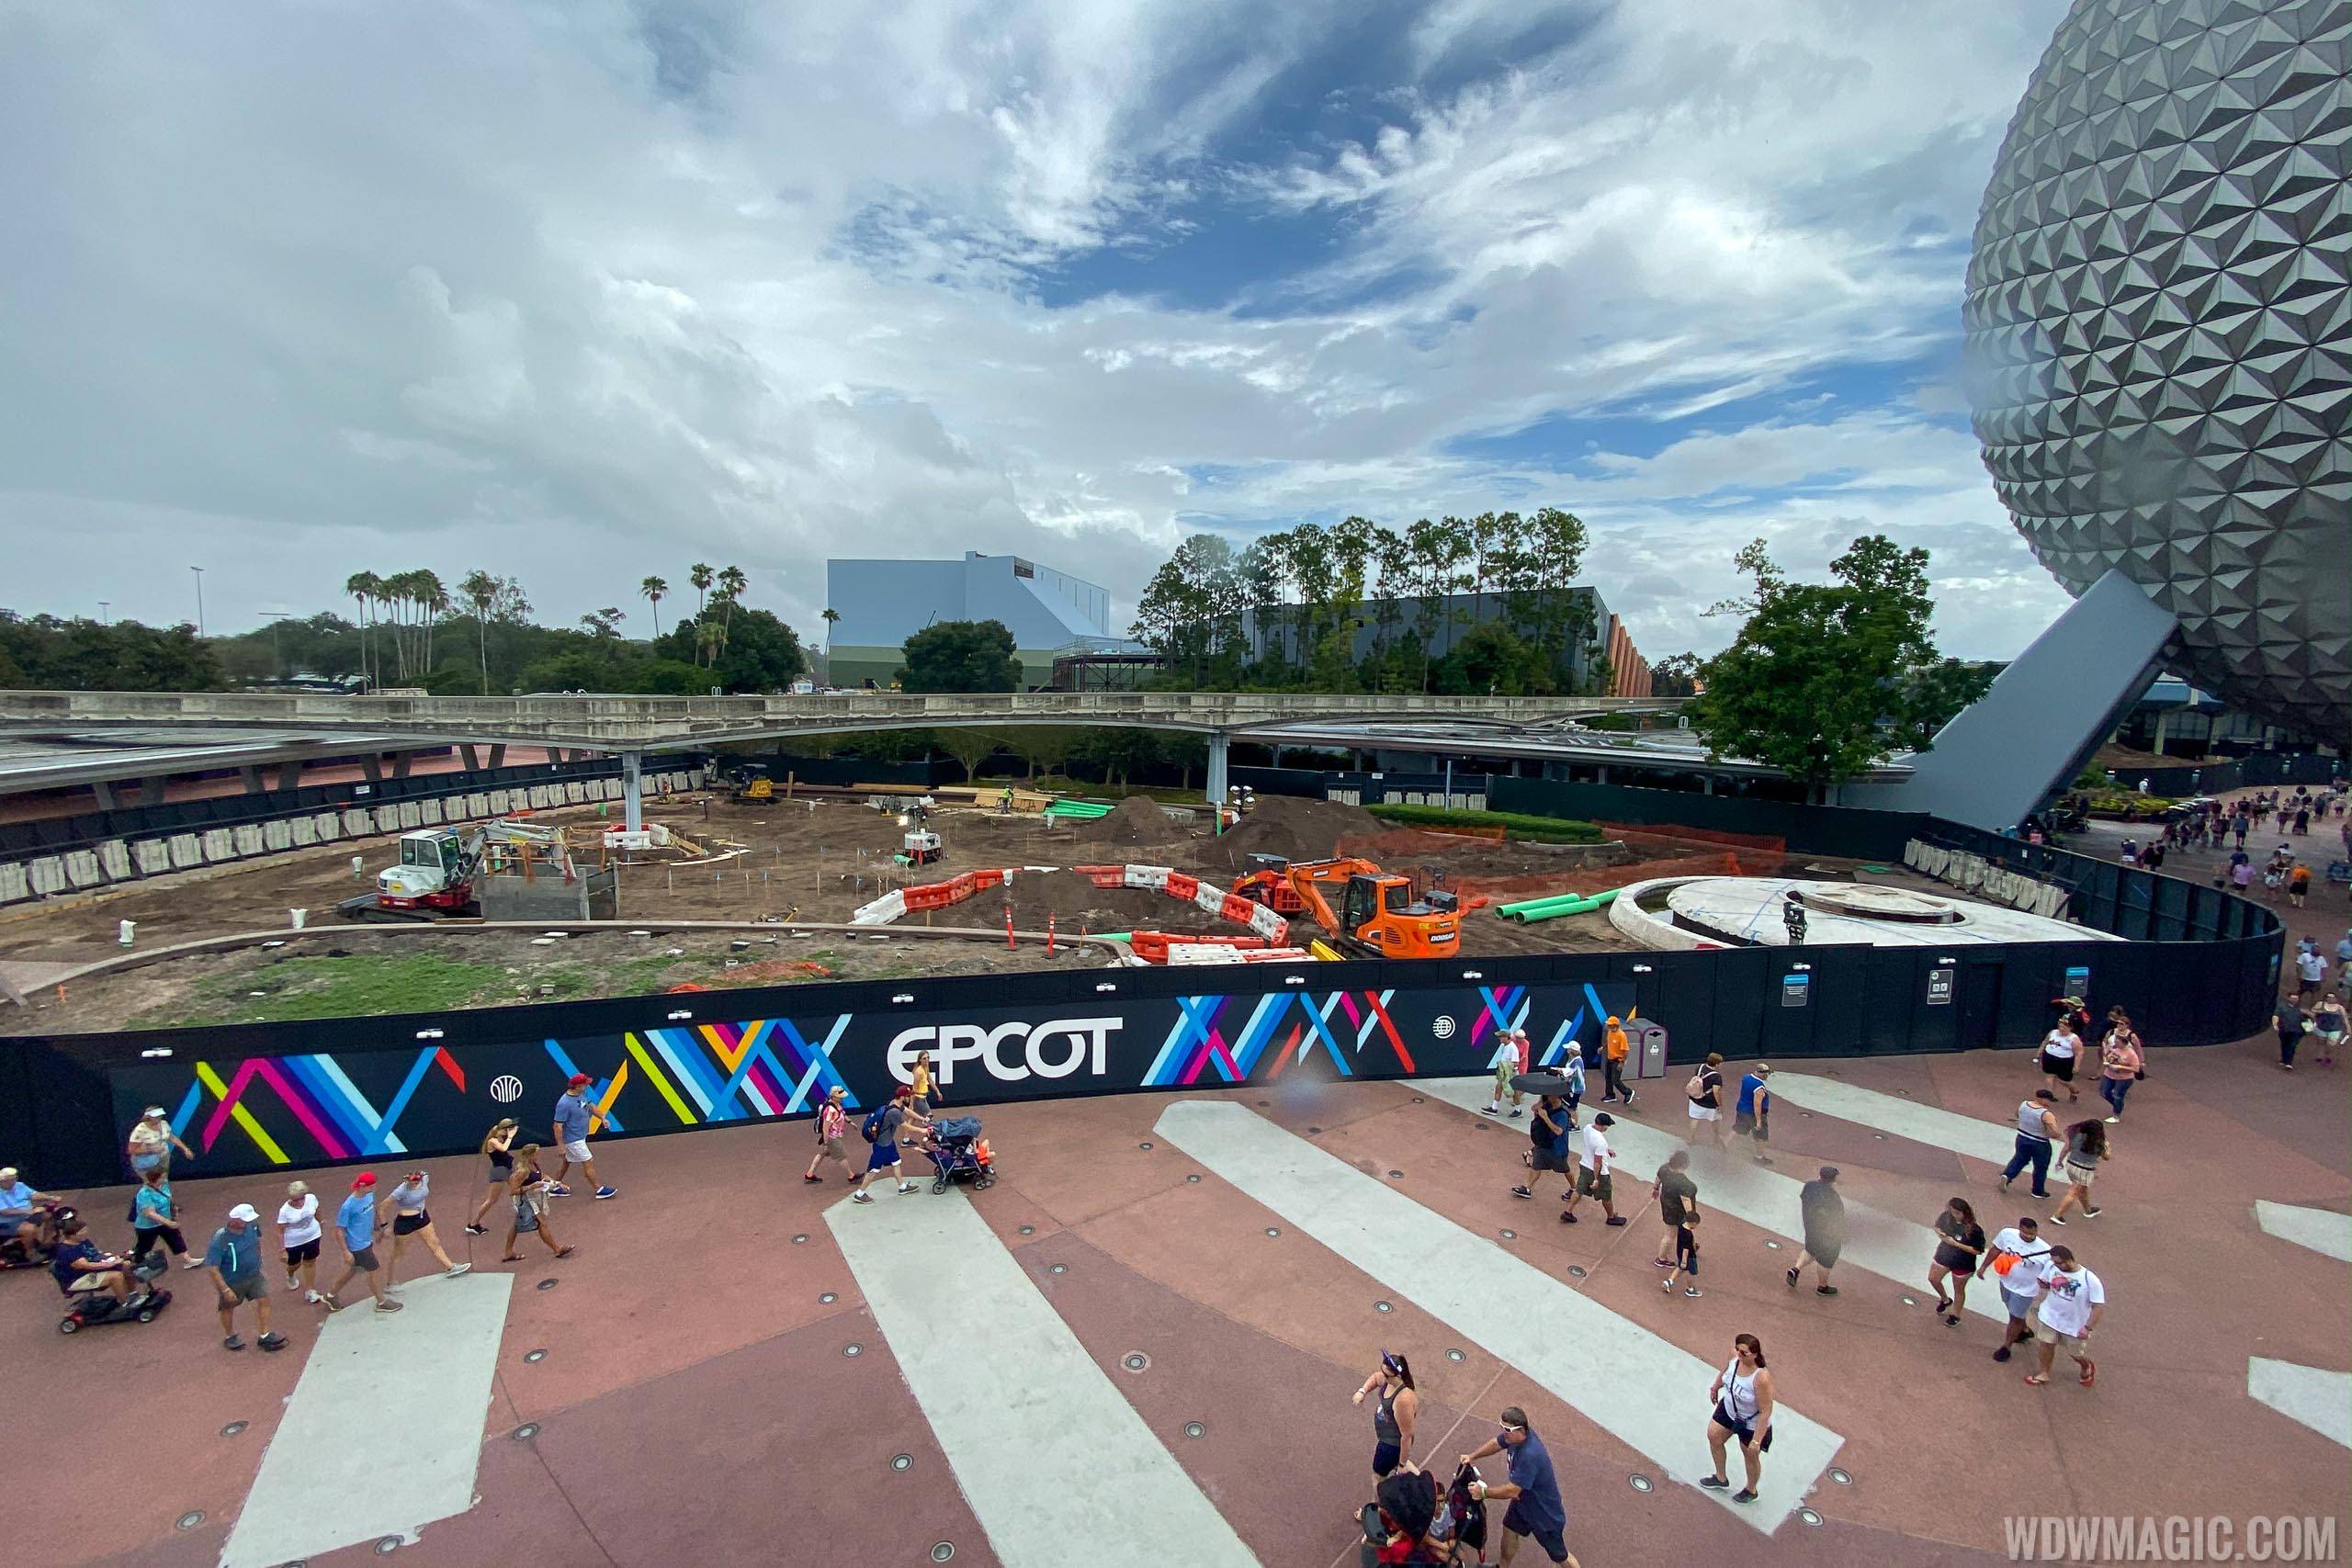 PHOTOS - A look at ground clearing and demolition in Epcot's central area